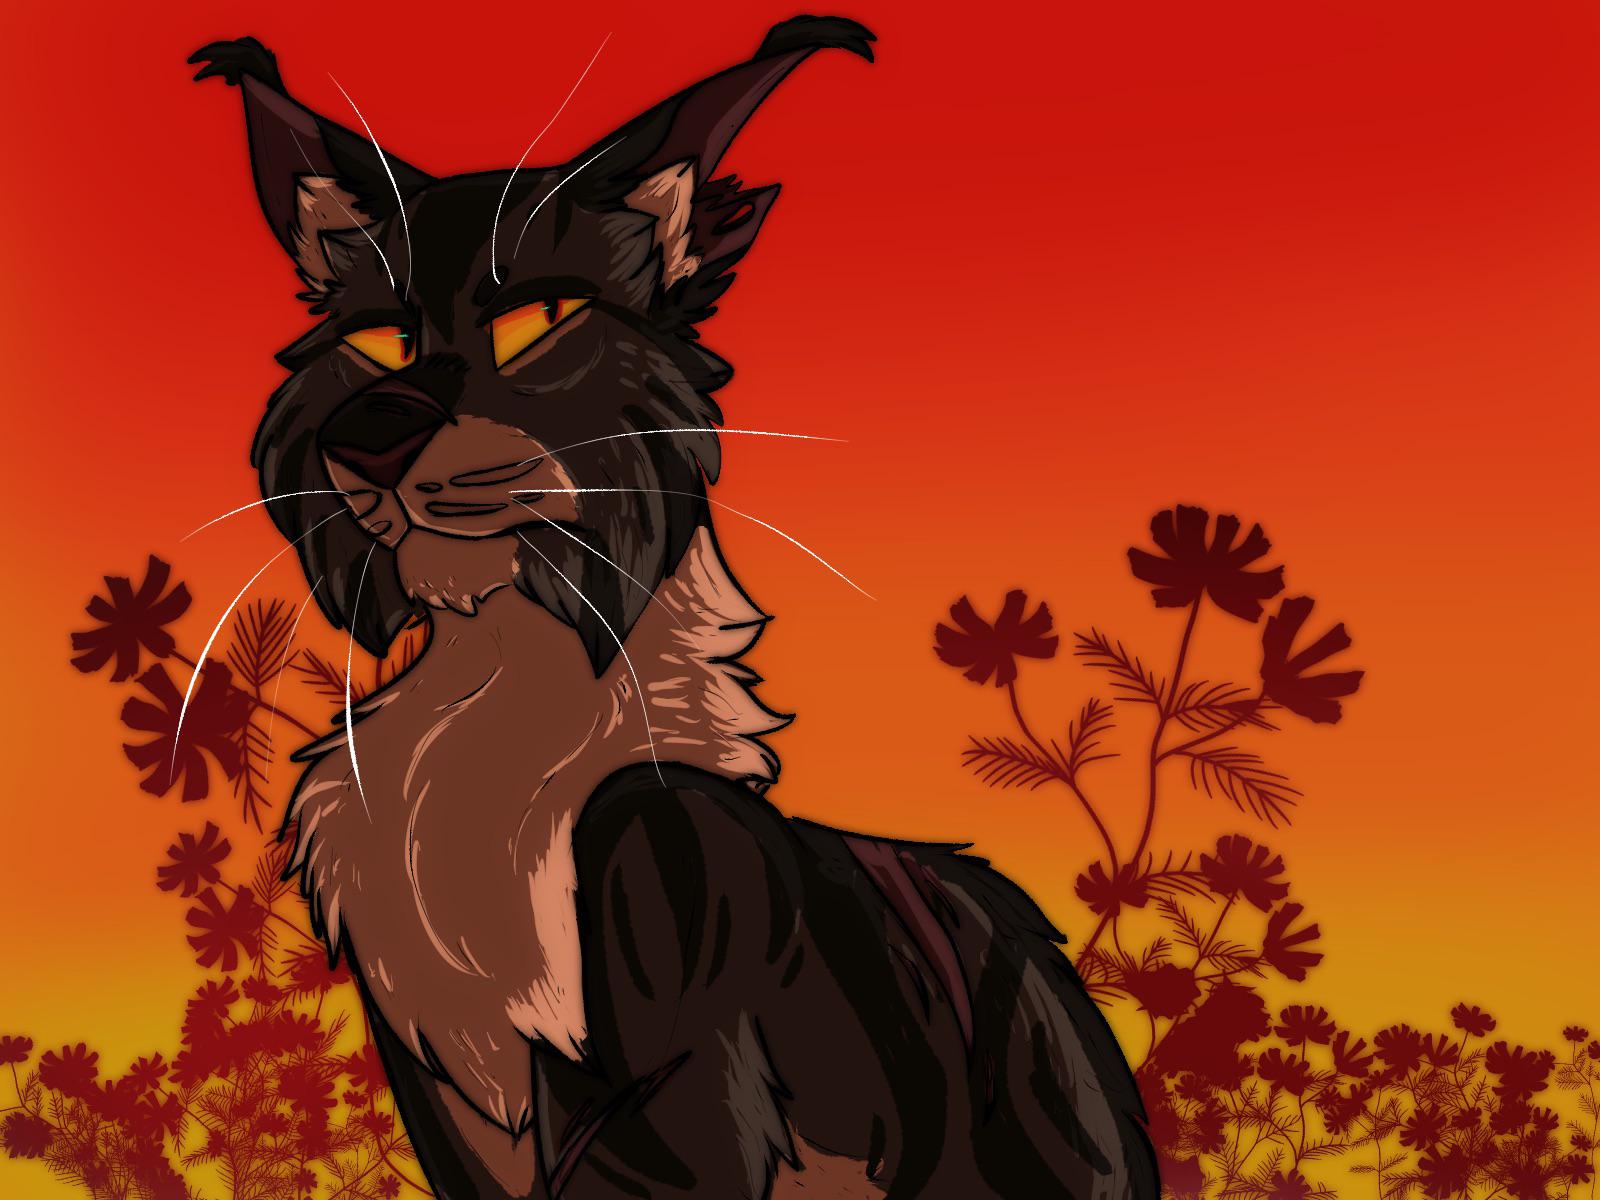 First drawing I did on Clip Studio, had to be Tigerstar